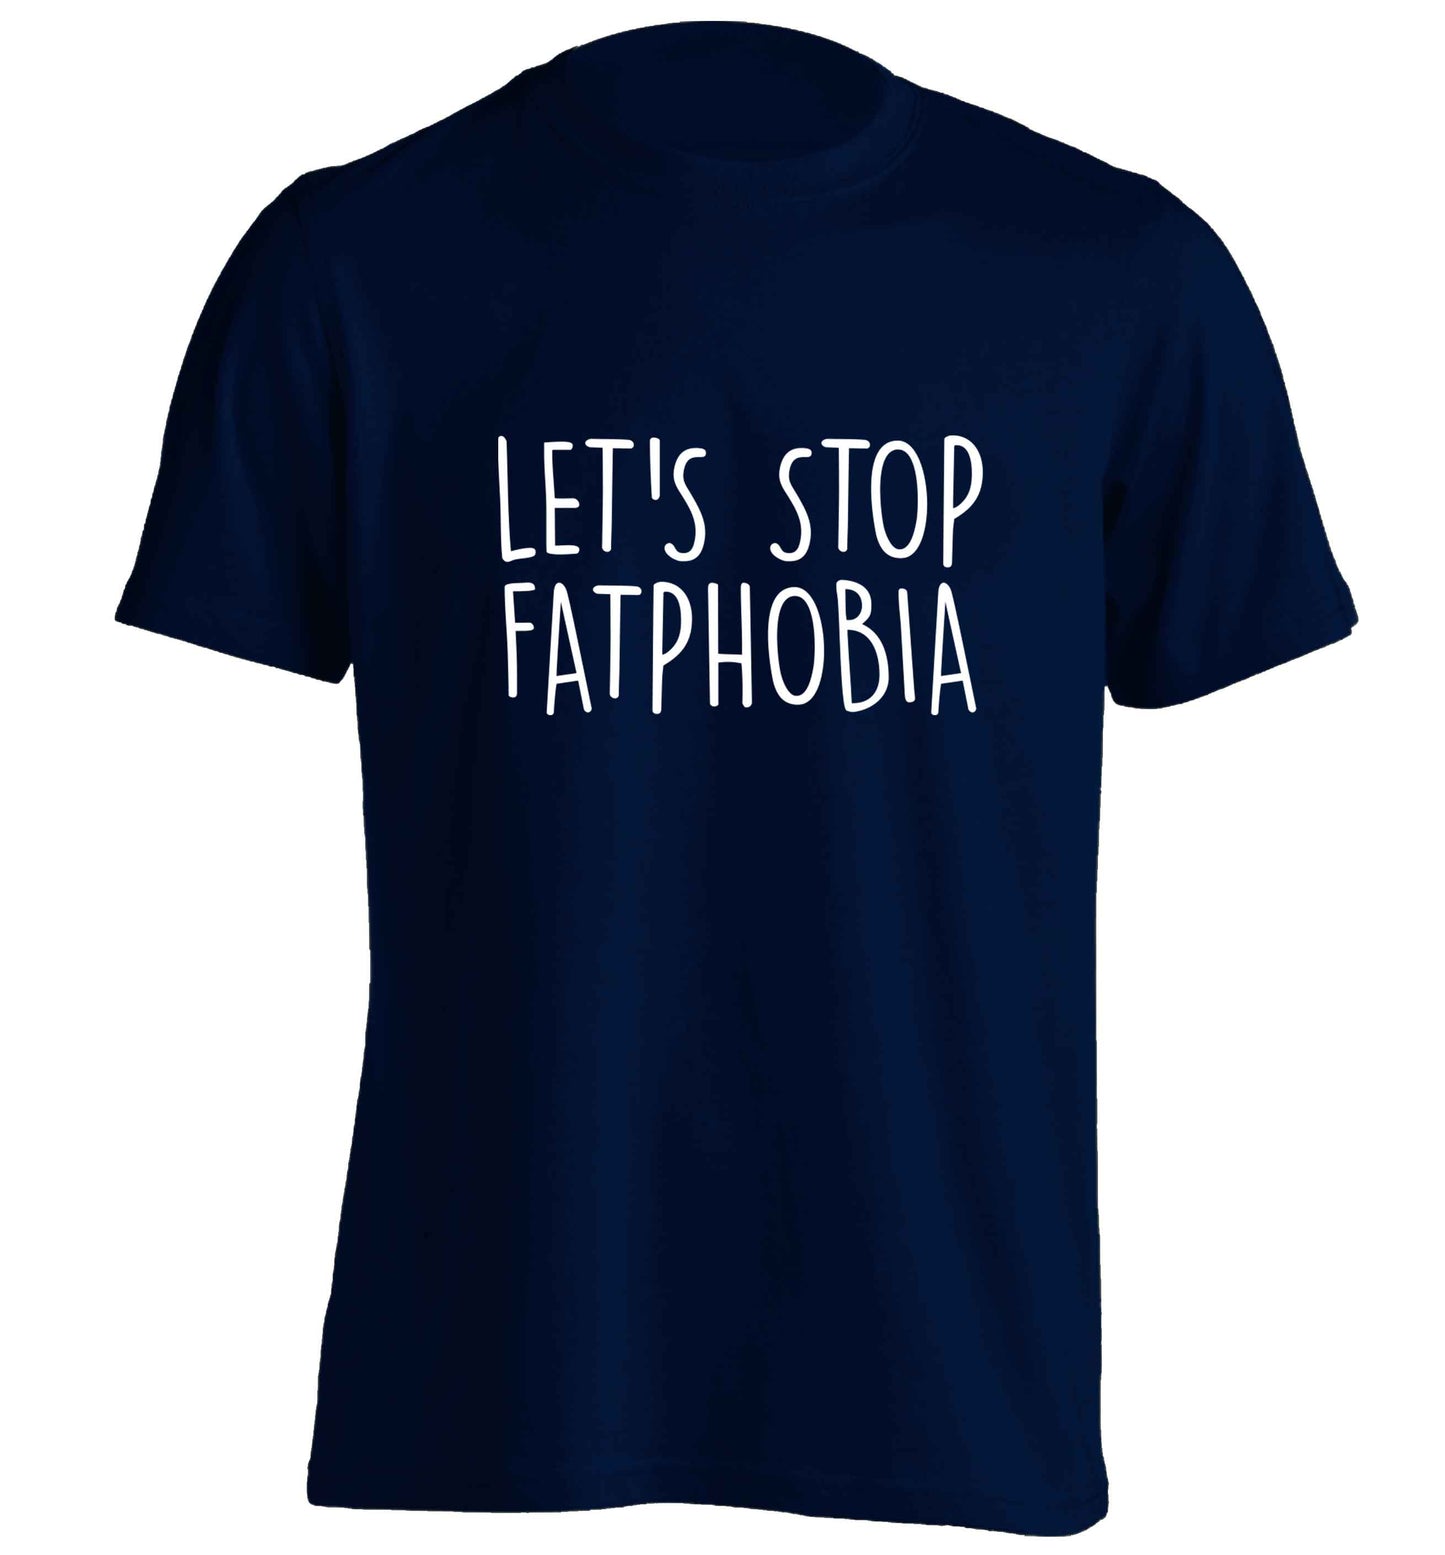 Let's stop fatphobia adults unisex navy Tshirt 2XL